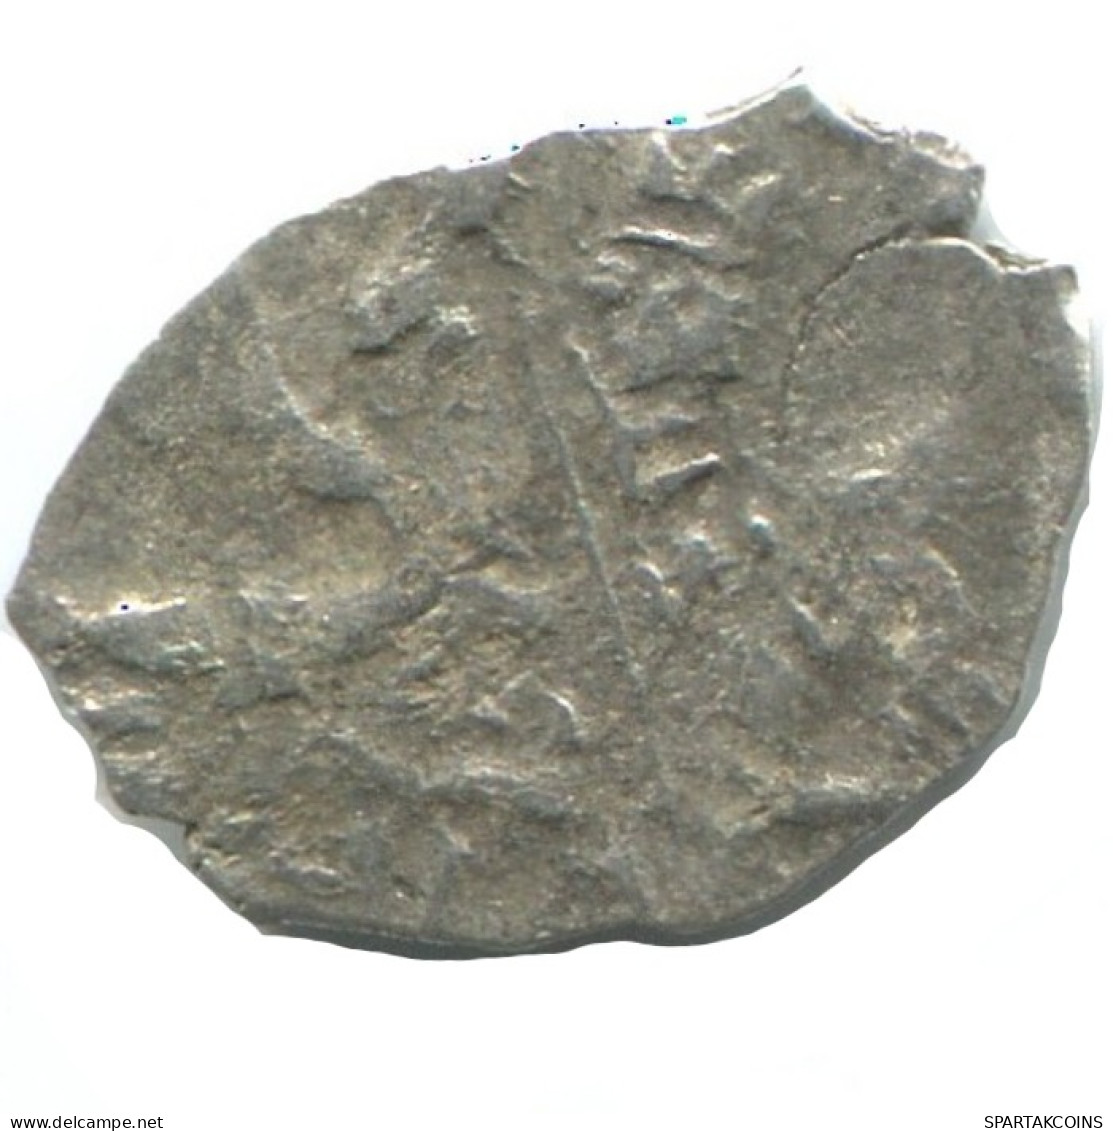 RUSIA RUSSIA 1702 KOPECK PETER I OLD Mint MOSCOW PLATA 0.4g/10mm #AB635.10.E.A - Russia